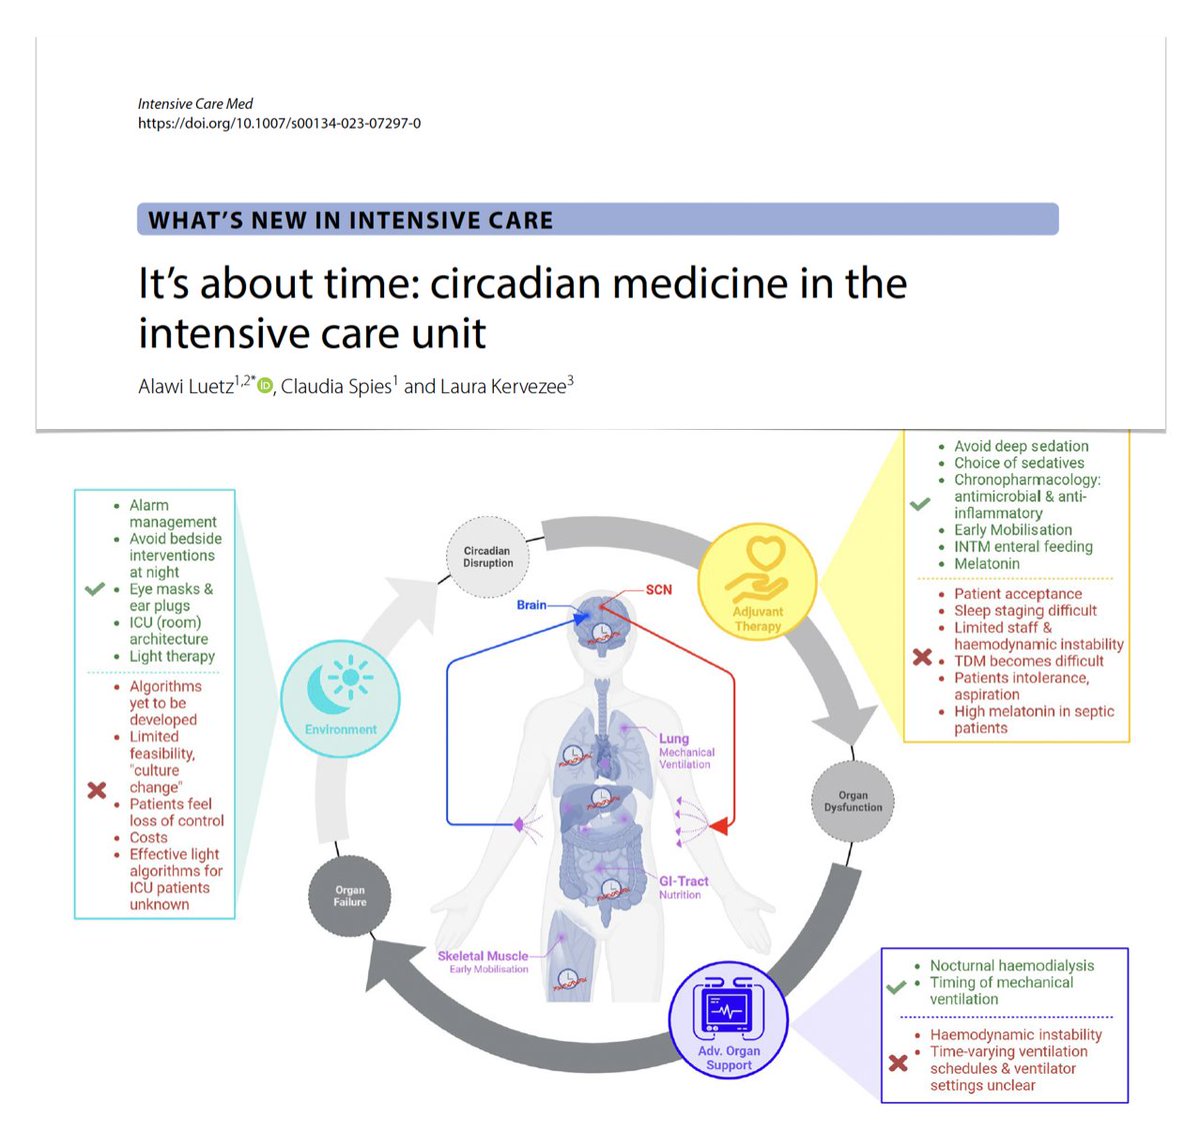 Circadian medicine in #ICU? The circadian nature of physiology has enormous untapped potential for research across intensive care medicine! ☀️ circadian disruption in critical patients 🌘 opportunities for circadian interventions #FOAMcc on @yourICM 🔓 rdcu.be/due59